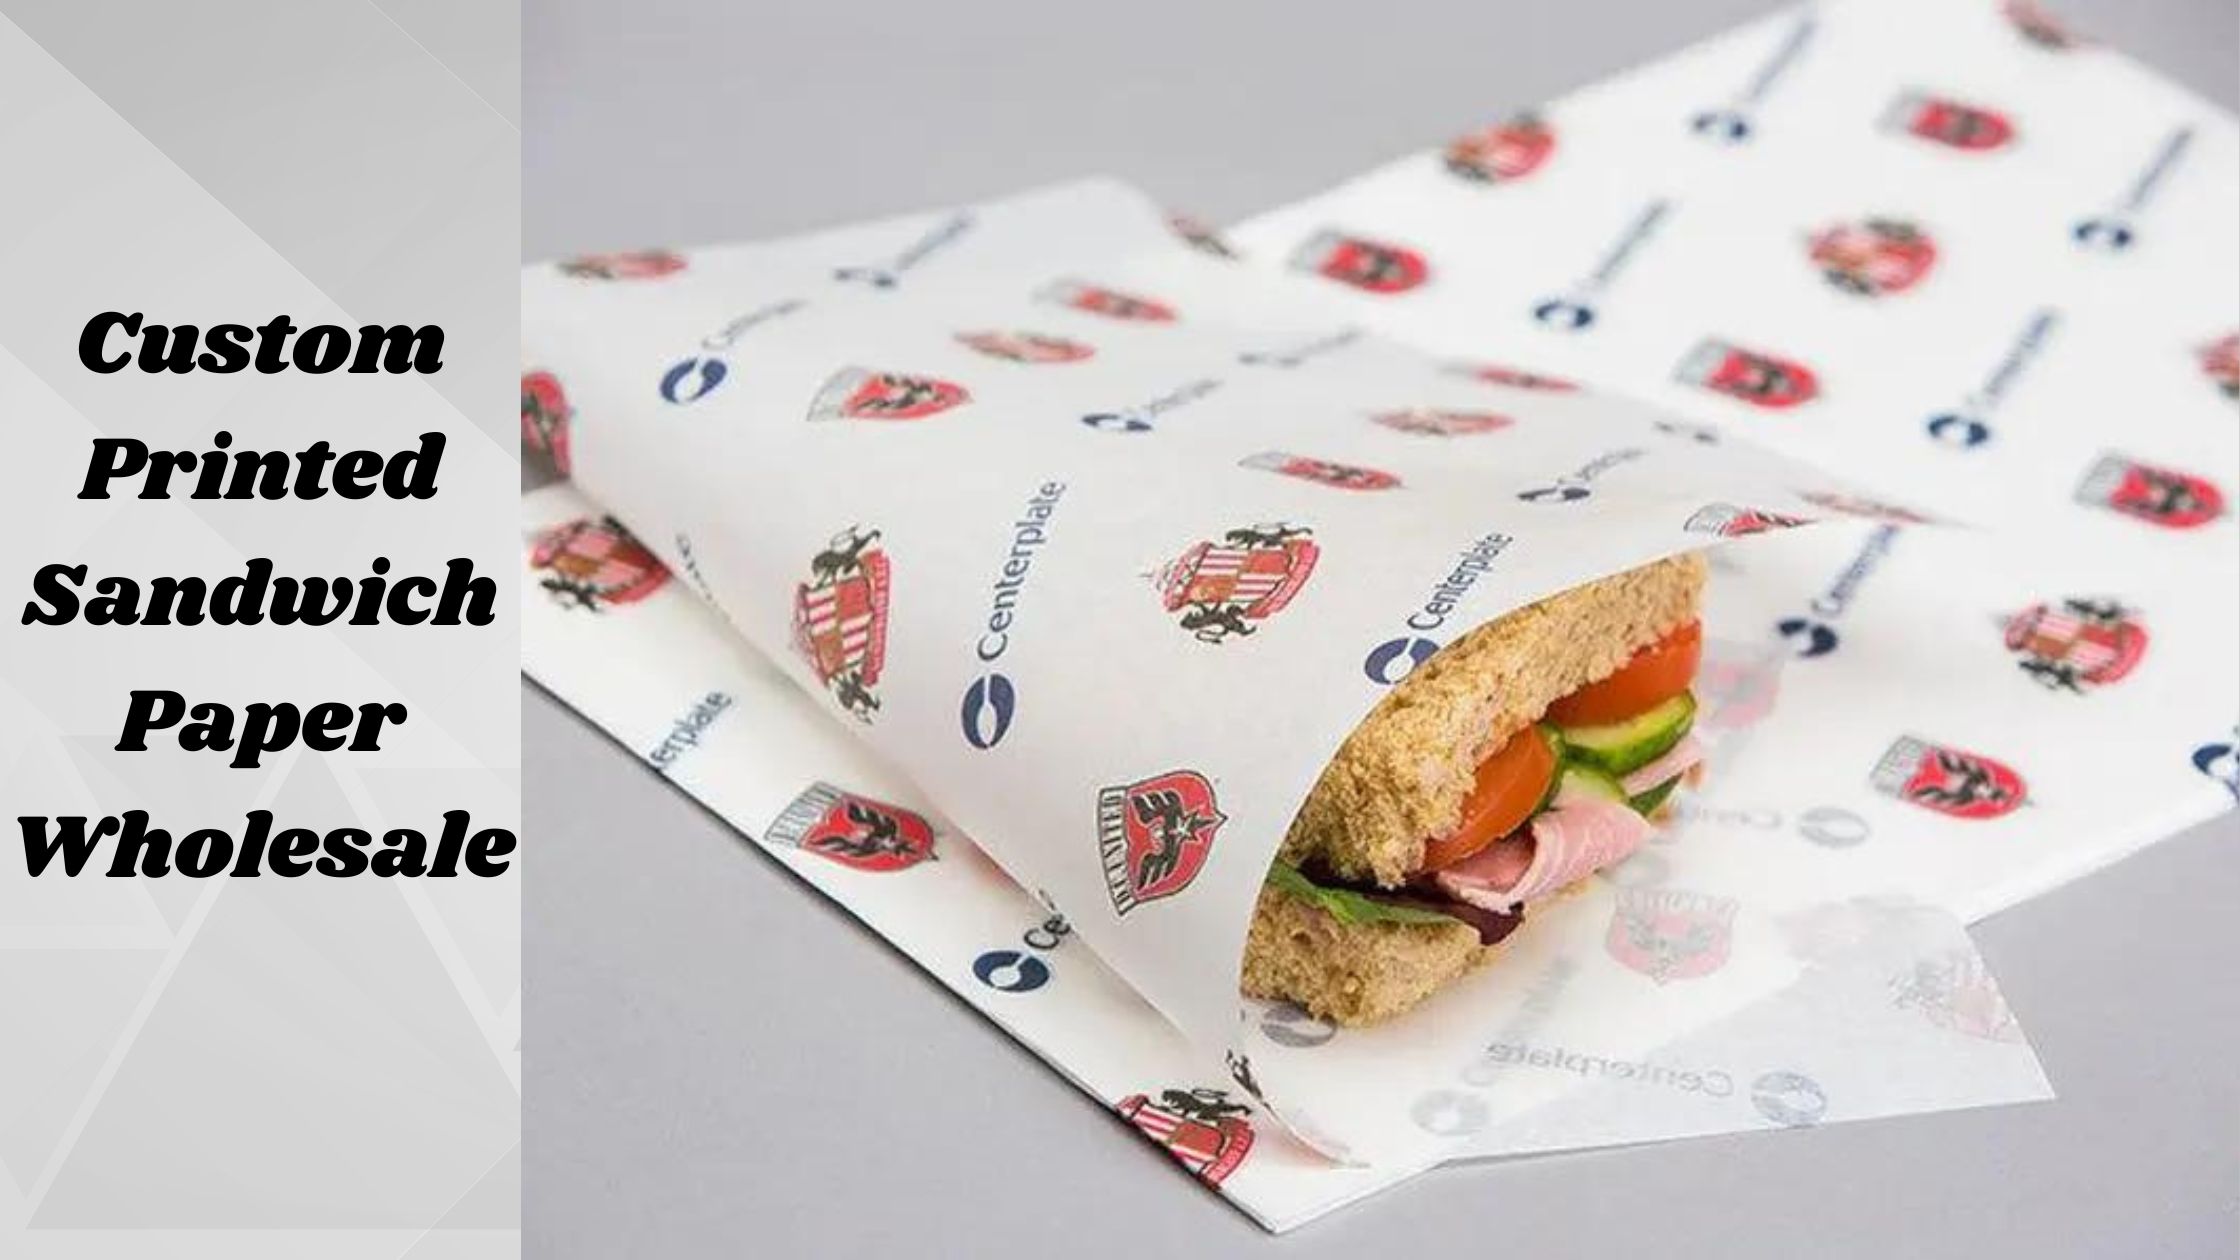 What Is The Purpose Of Custom Printed Sandwich Paper?